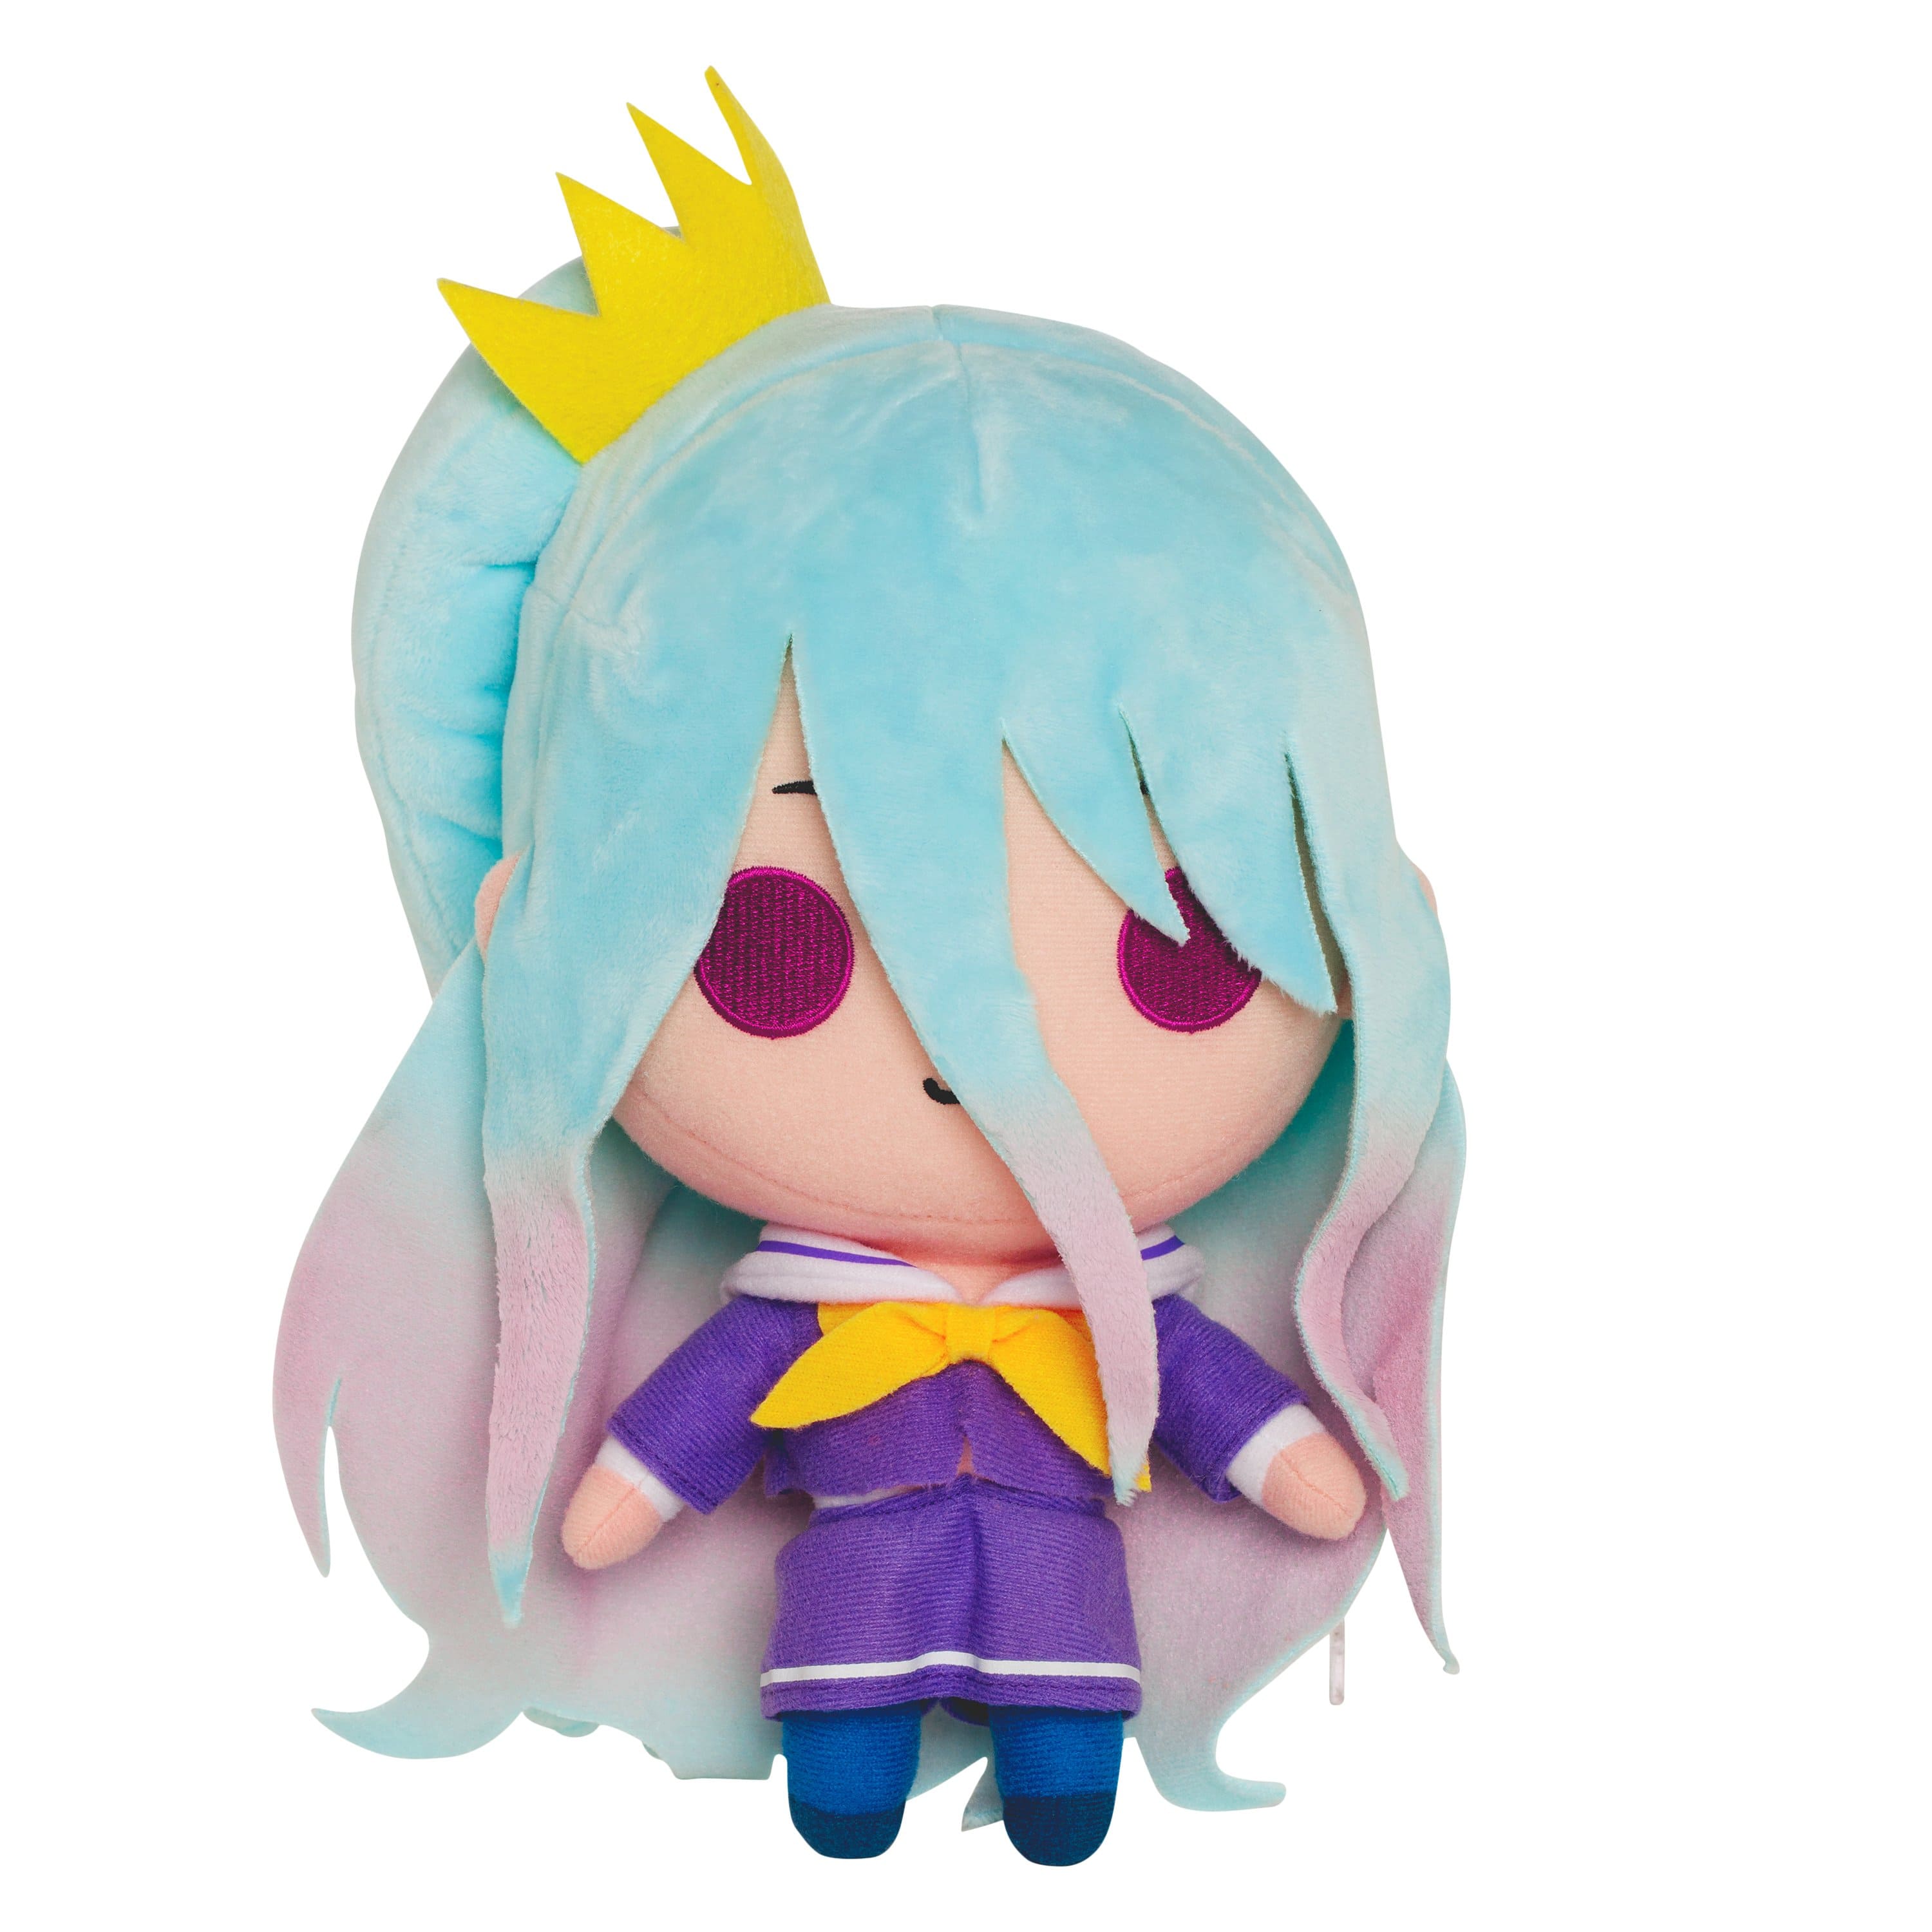 No Game No Life - 10" Shiro Collector's Stuffed Plush Toy Front View